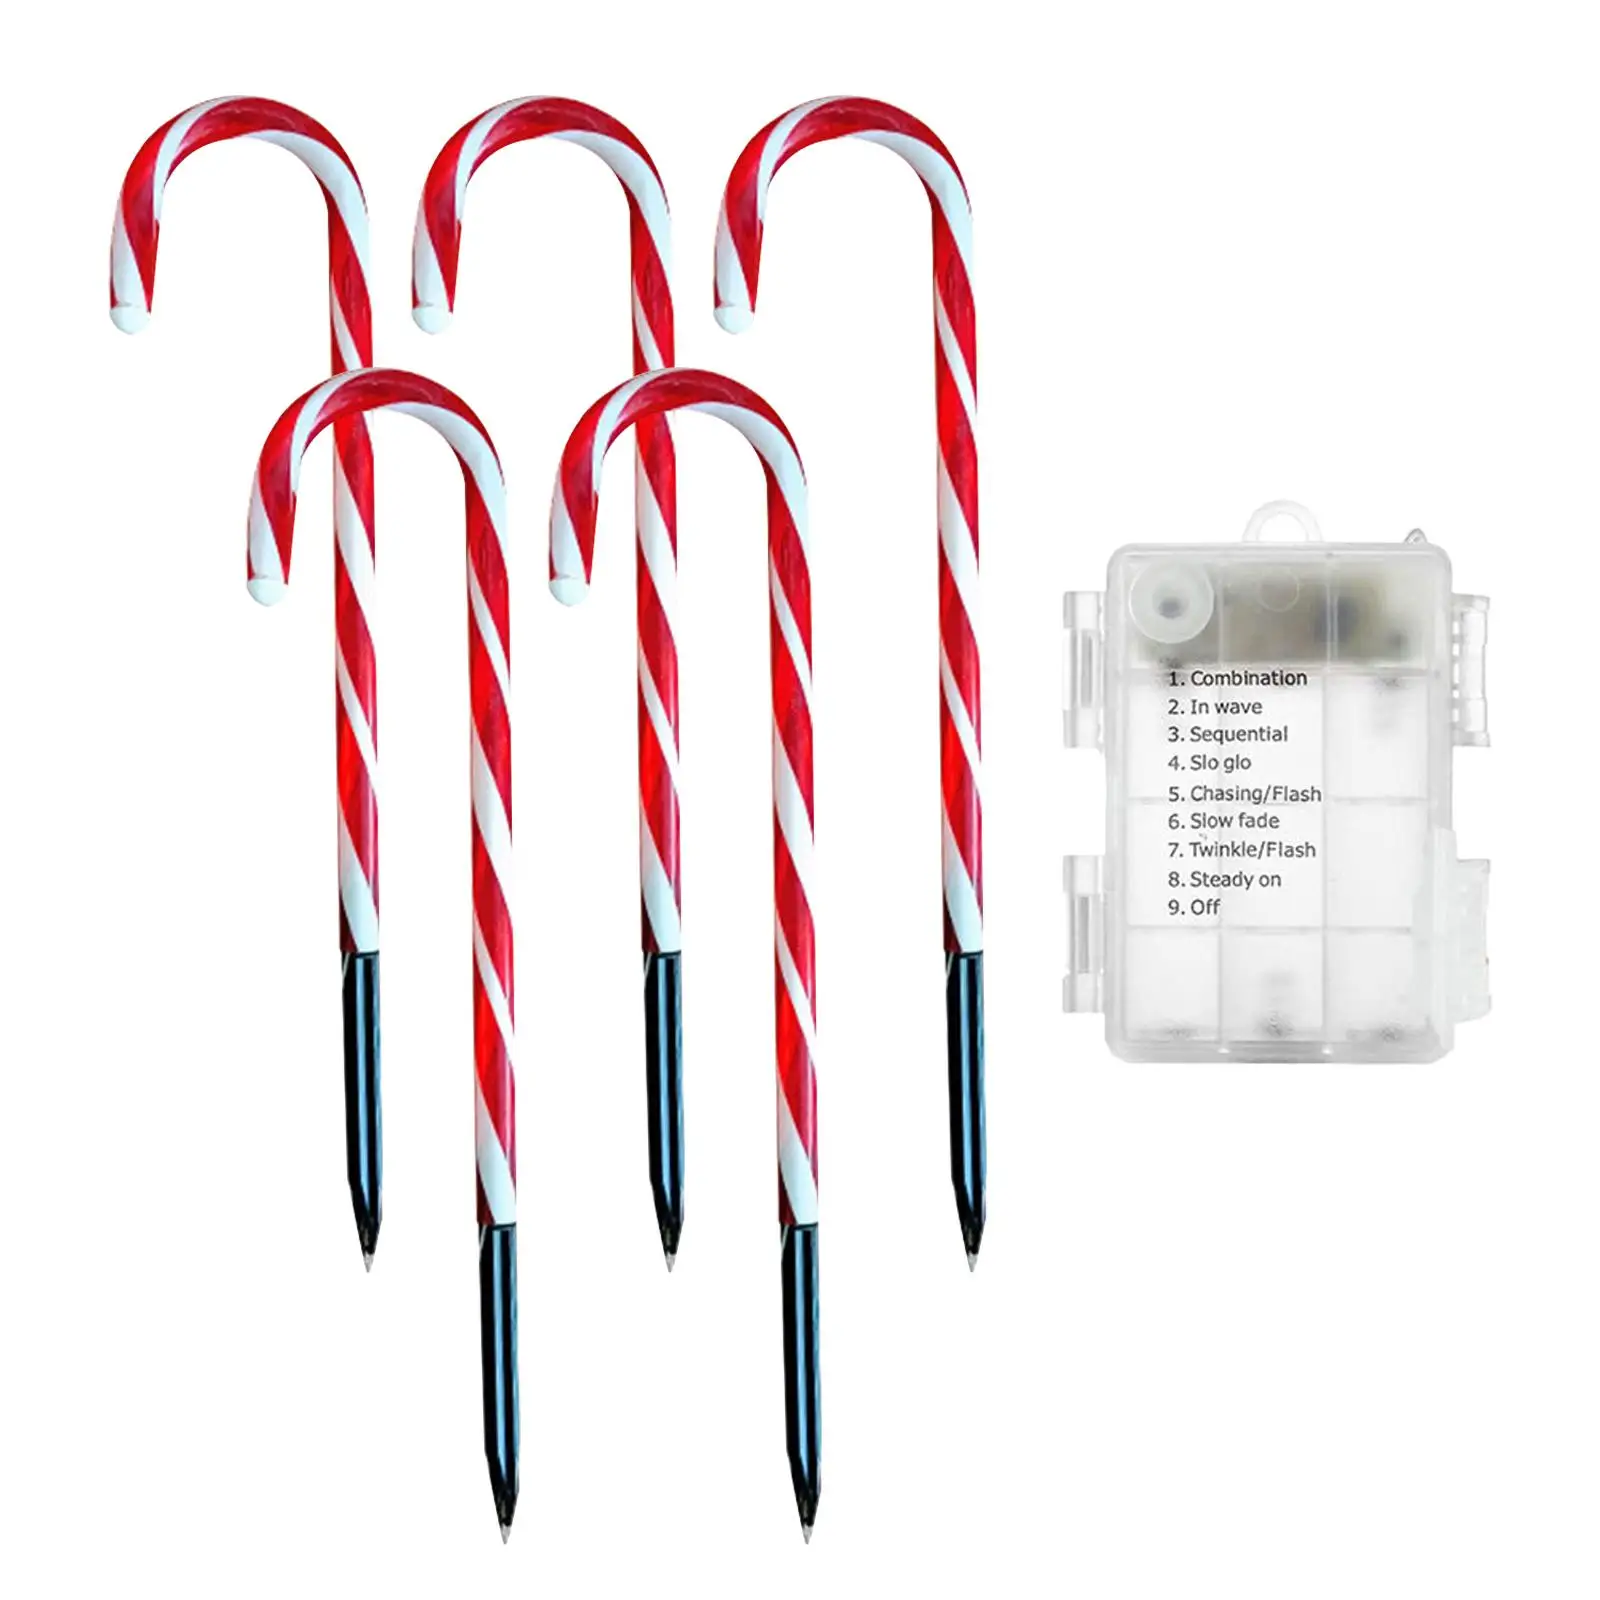 Christmas LED Lamps Waterproof Crutch Light Ornaments Fairy Lights Candy Cane Battery Operated Lights for Outdoor Yard Backyard